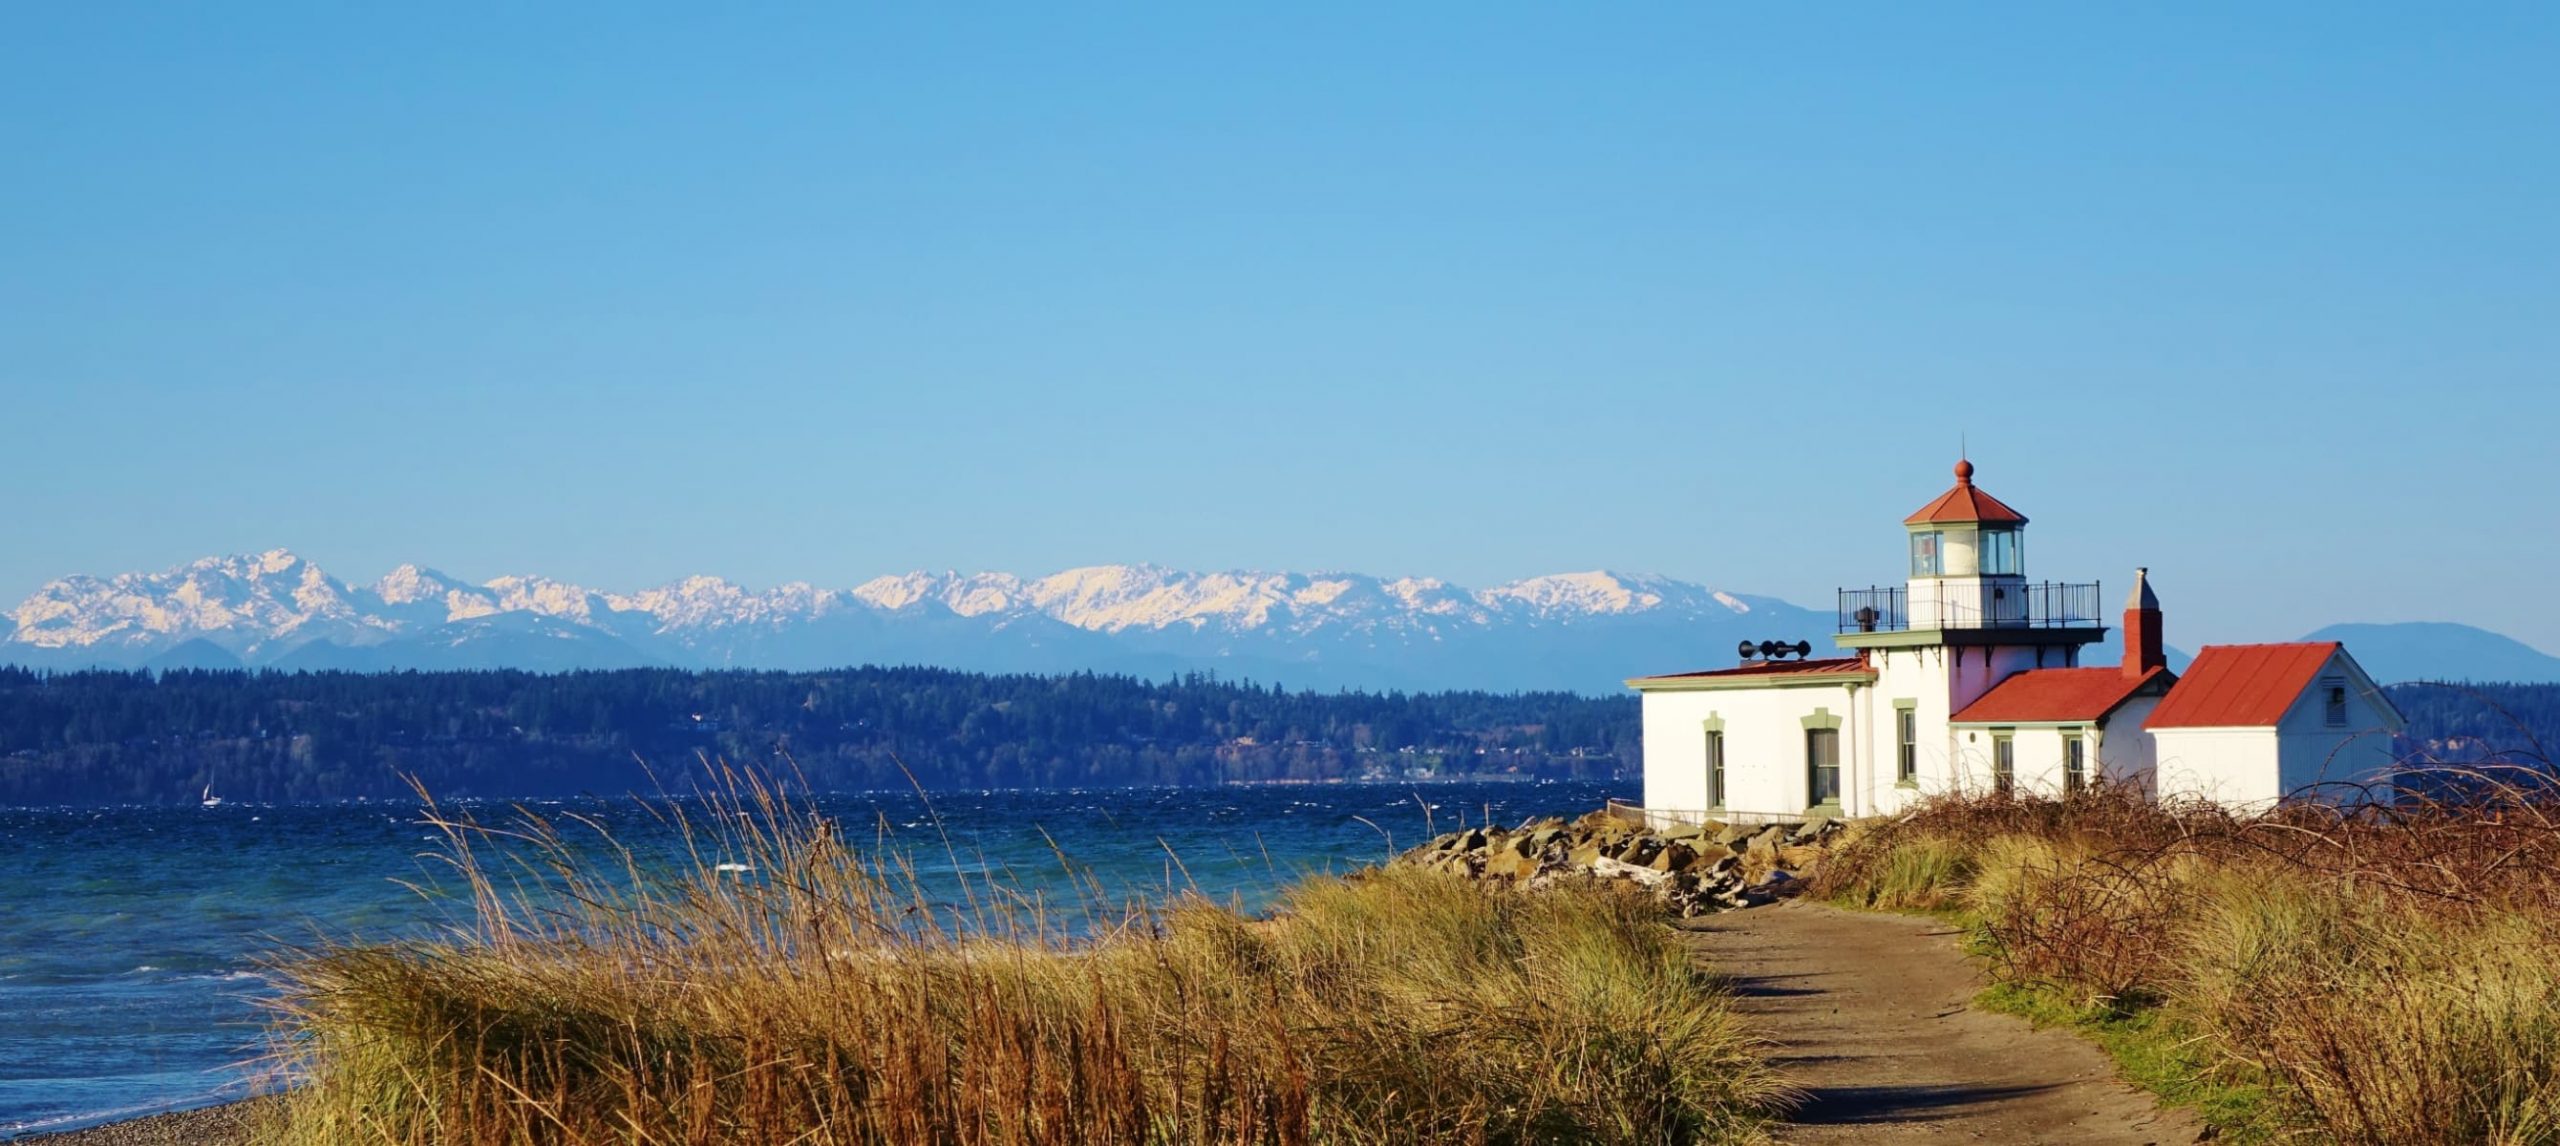 The West Point Lighthouse, situated at the midpoint of Discovery Park's 4.5-mile loop trail, offers an oceanic view of the Cascade and Olympic mountain ranges.